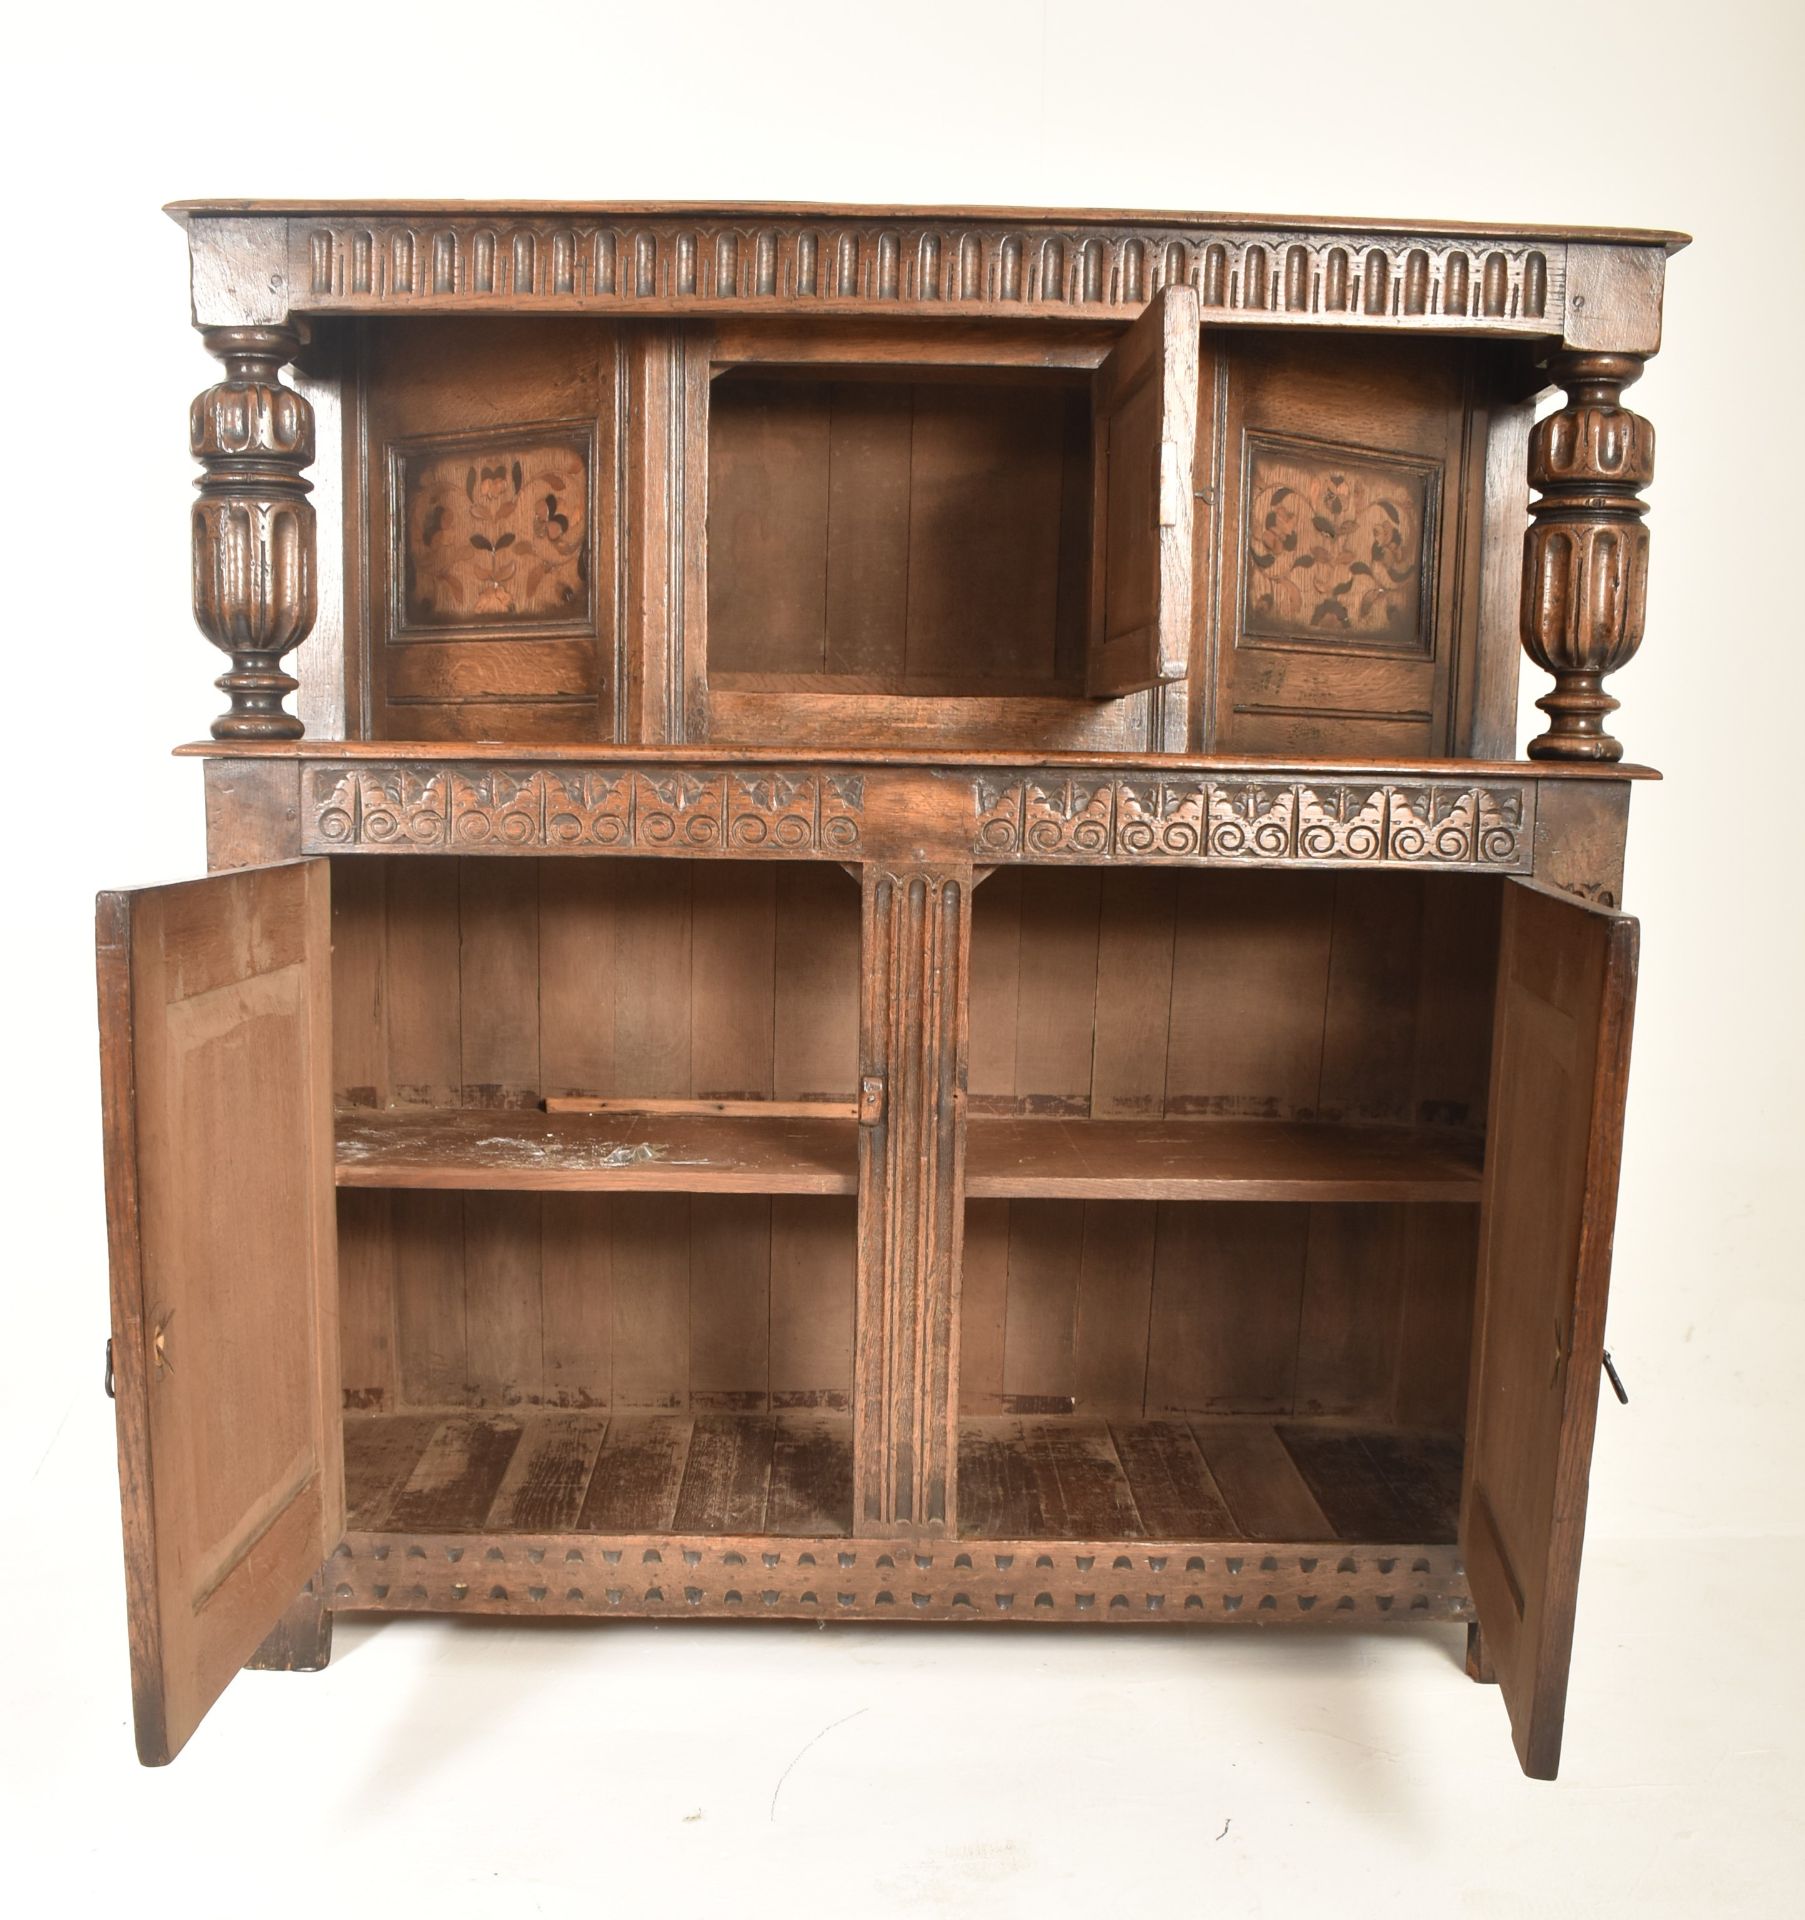 ELIZABETHAN STYLE 19TH CENTURY CARVED OAK COURT CUPBOARD - Image 2 of 7